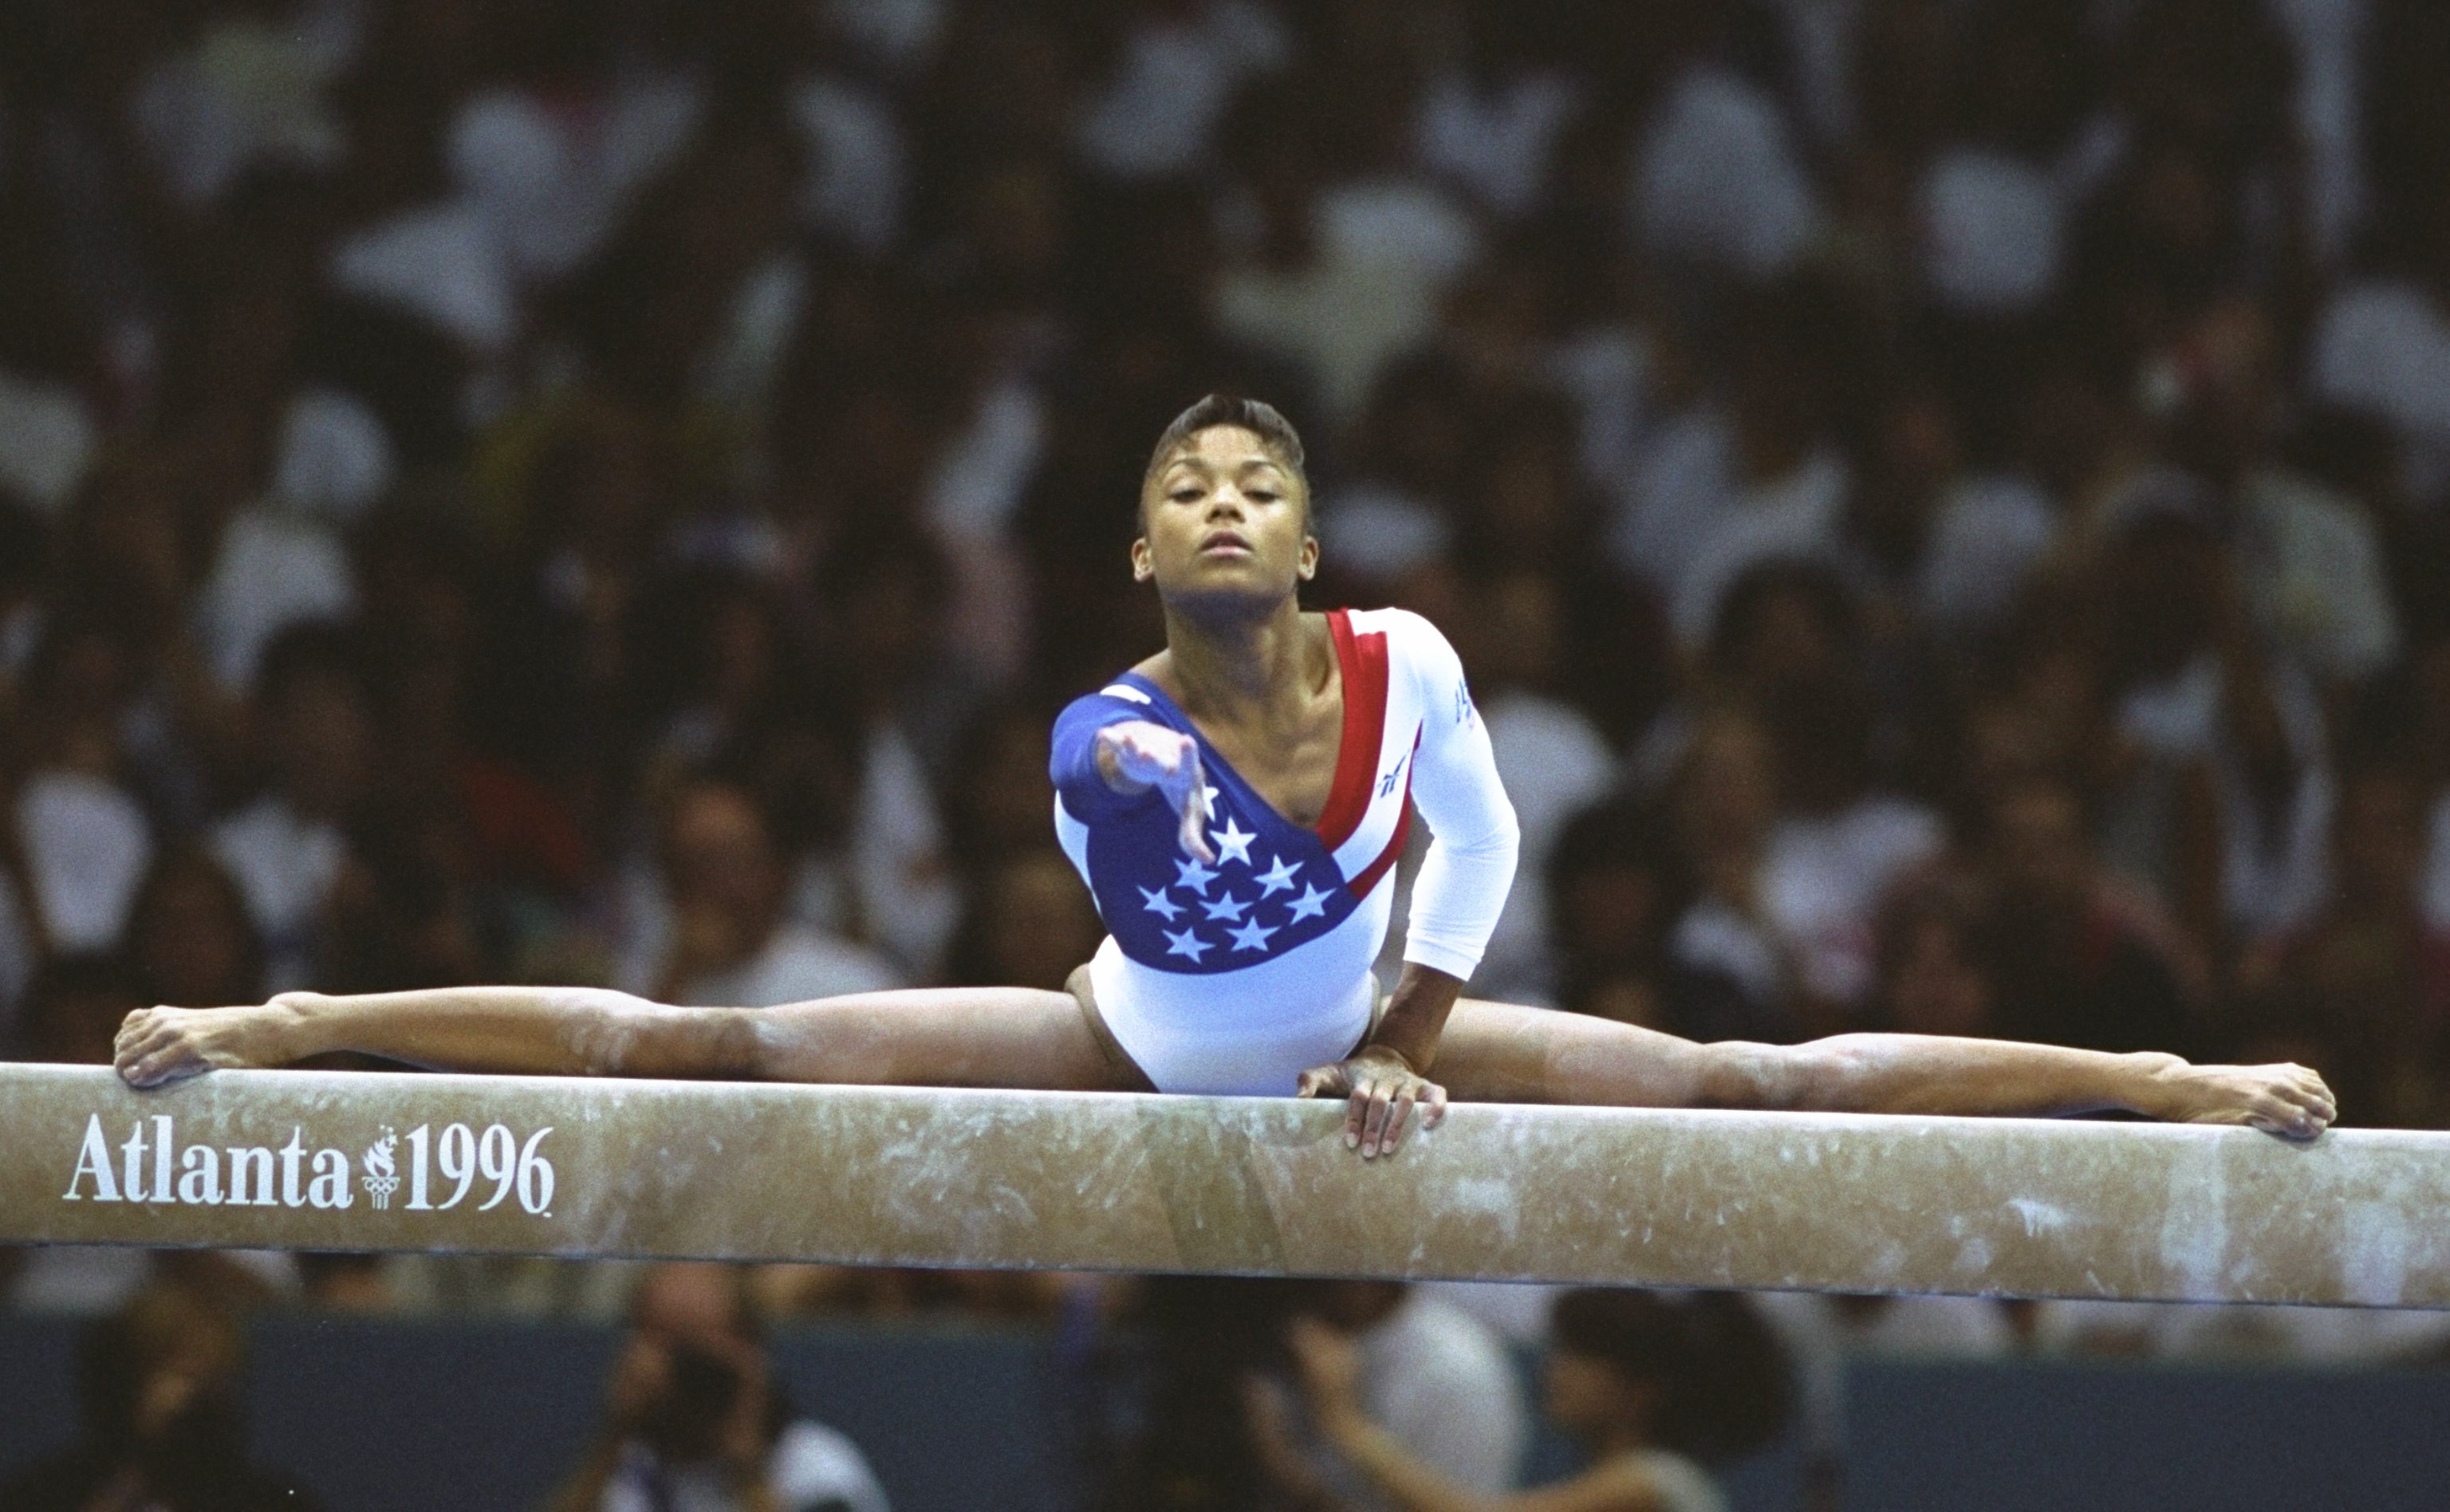 Dominique Dawes of the USA on the beam during the womens team gymnastics event at the Georgia Dome at the 1996 Centennial Olympic Games in Atlanta on July 23, 1996. (Doug Pensinger—Getty Images)